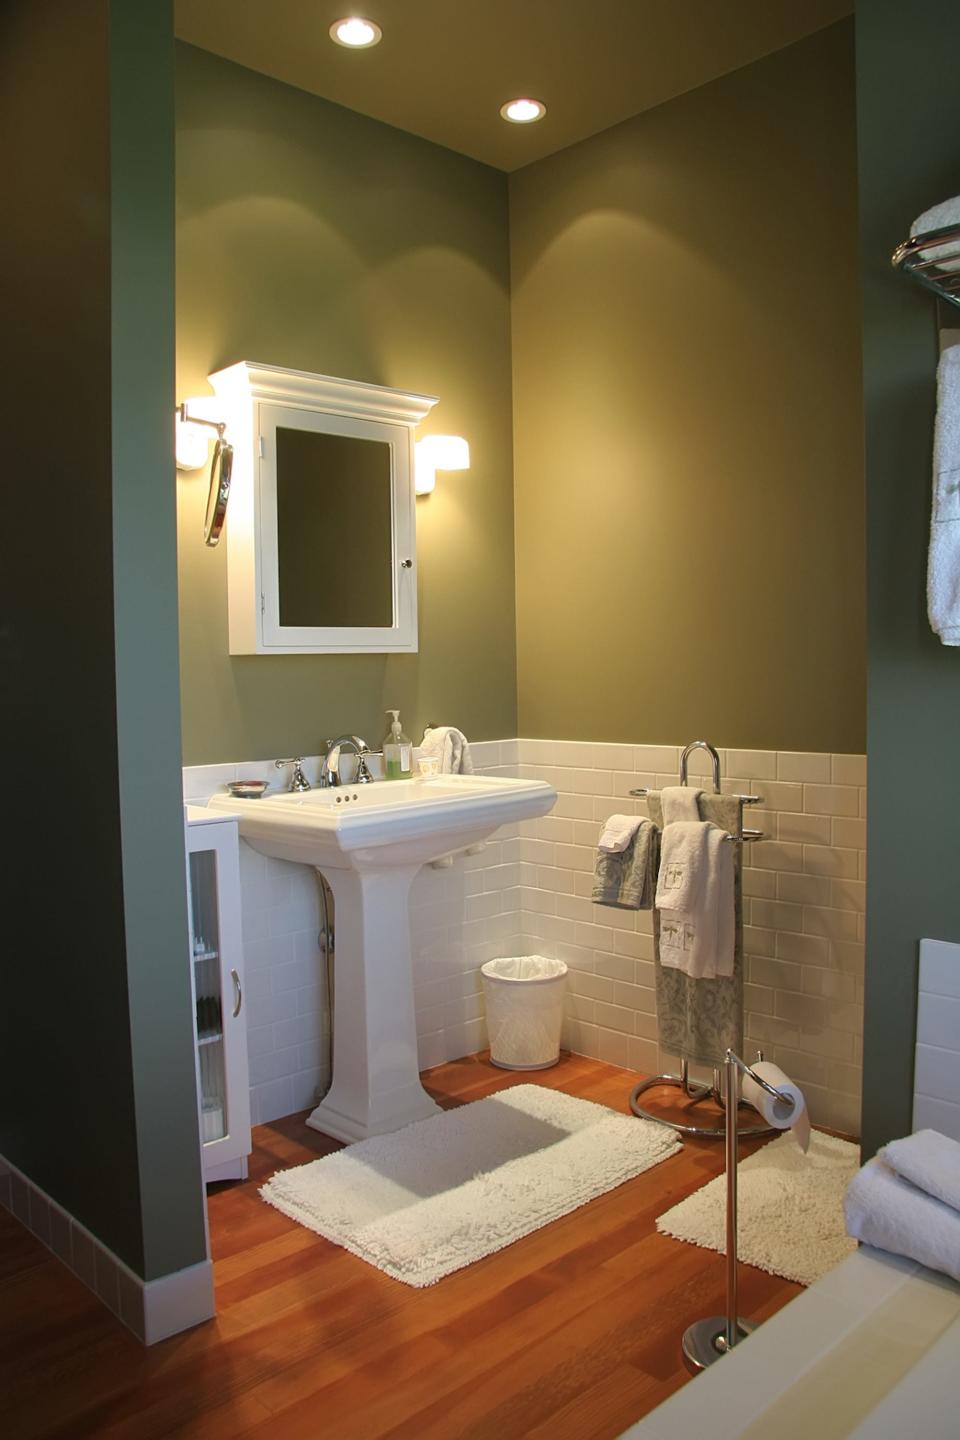 A bathroom with a sink, vanity, and multiple bath mats.